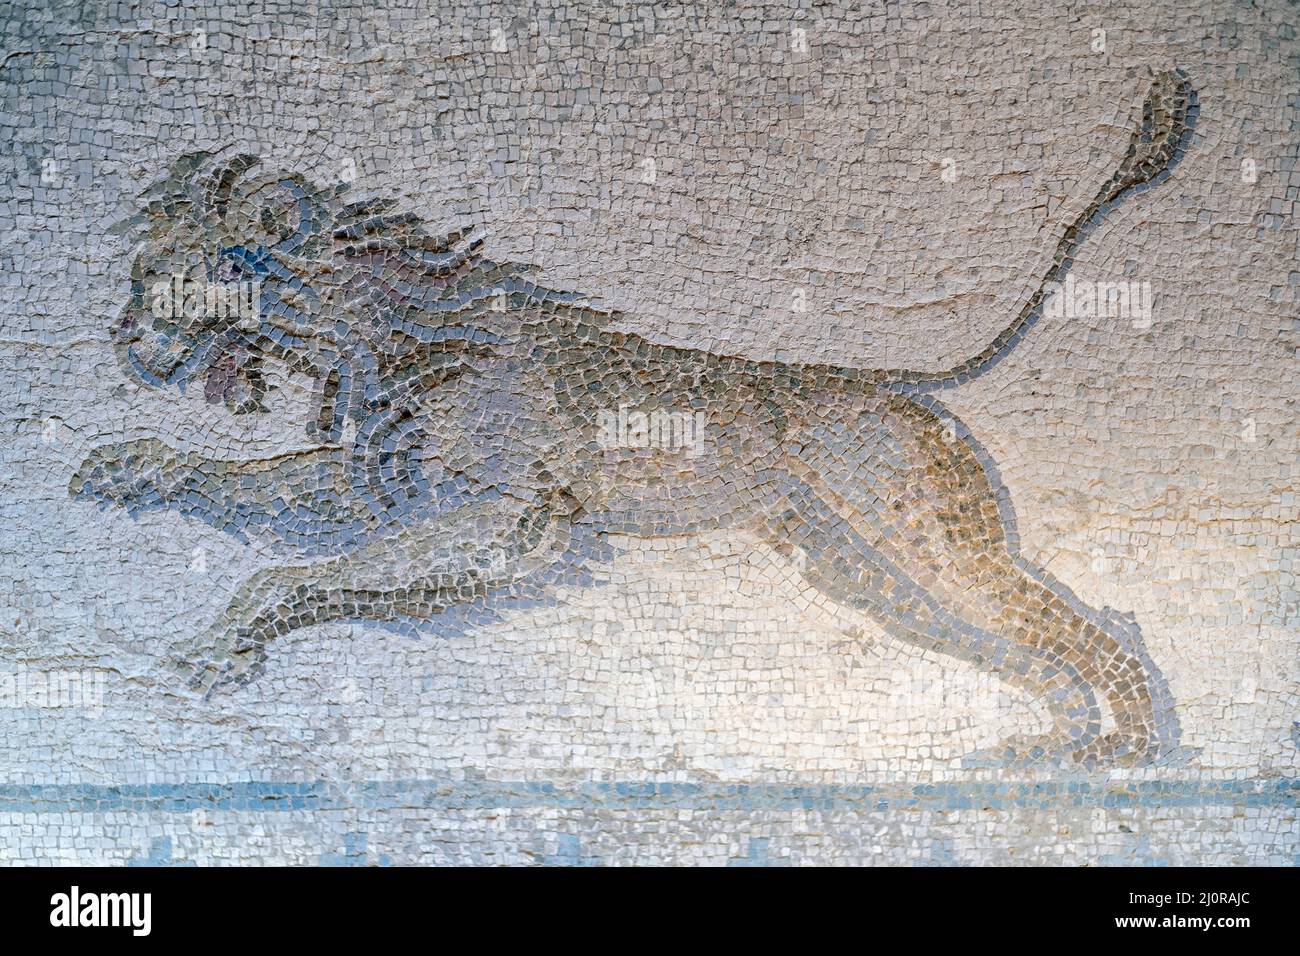 House of Dionysus, Paphos, Cyprus: Hunting scene Roman floor mosaic a charging lion. Stock Photo